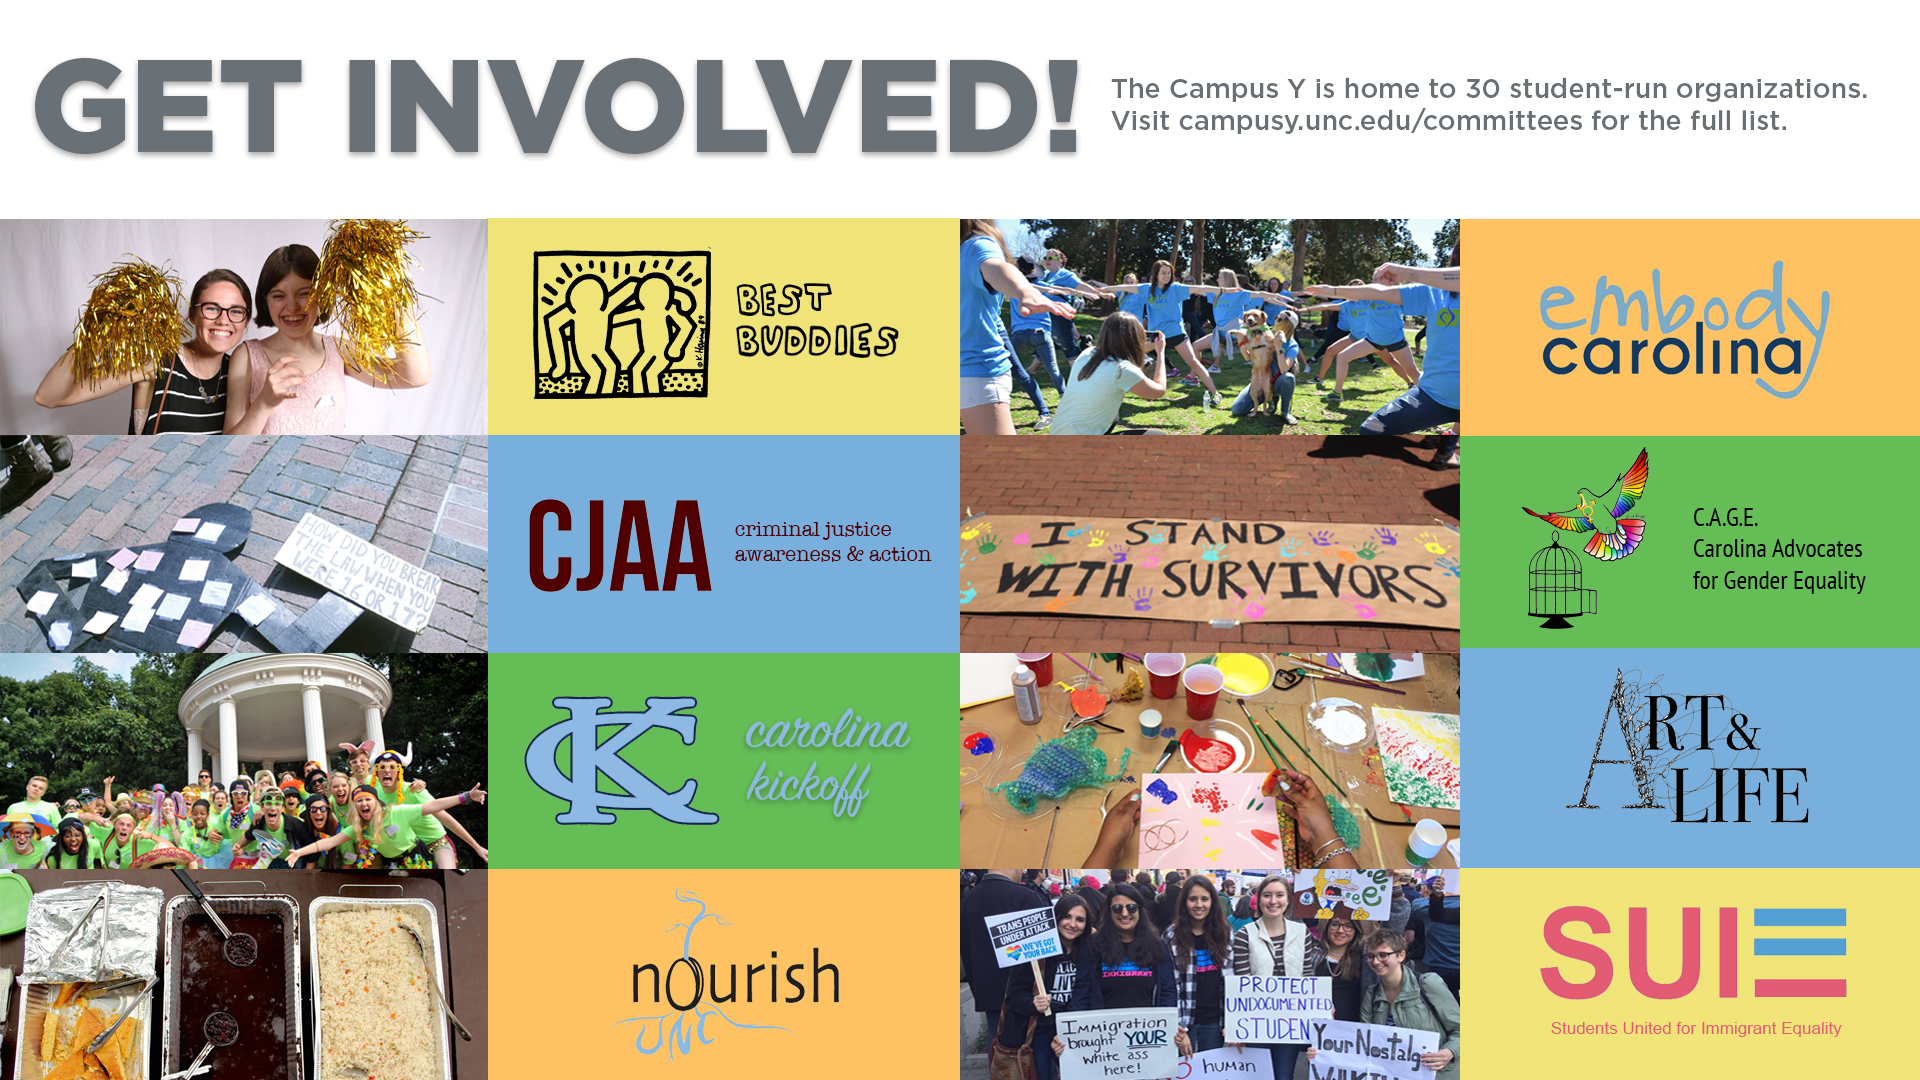 Get involved! The Campus Y is home to 30 student-run organizations. Visit campusy.unc.edu/committees for the full list. 